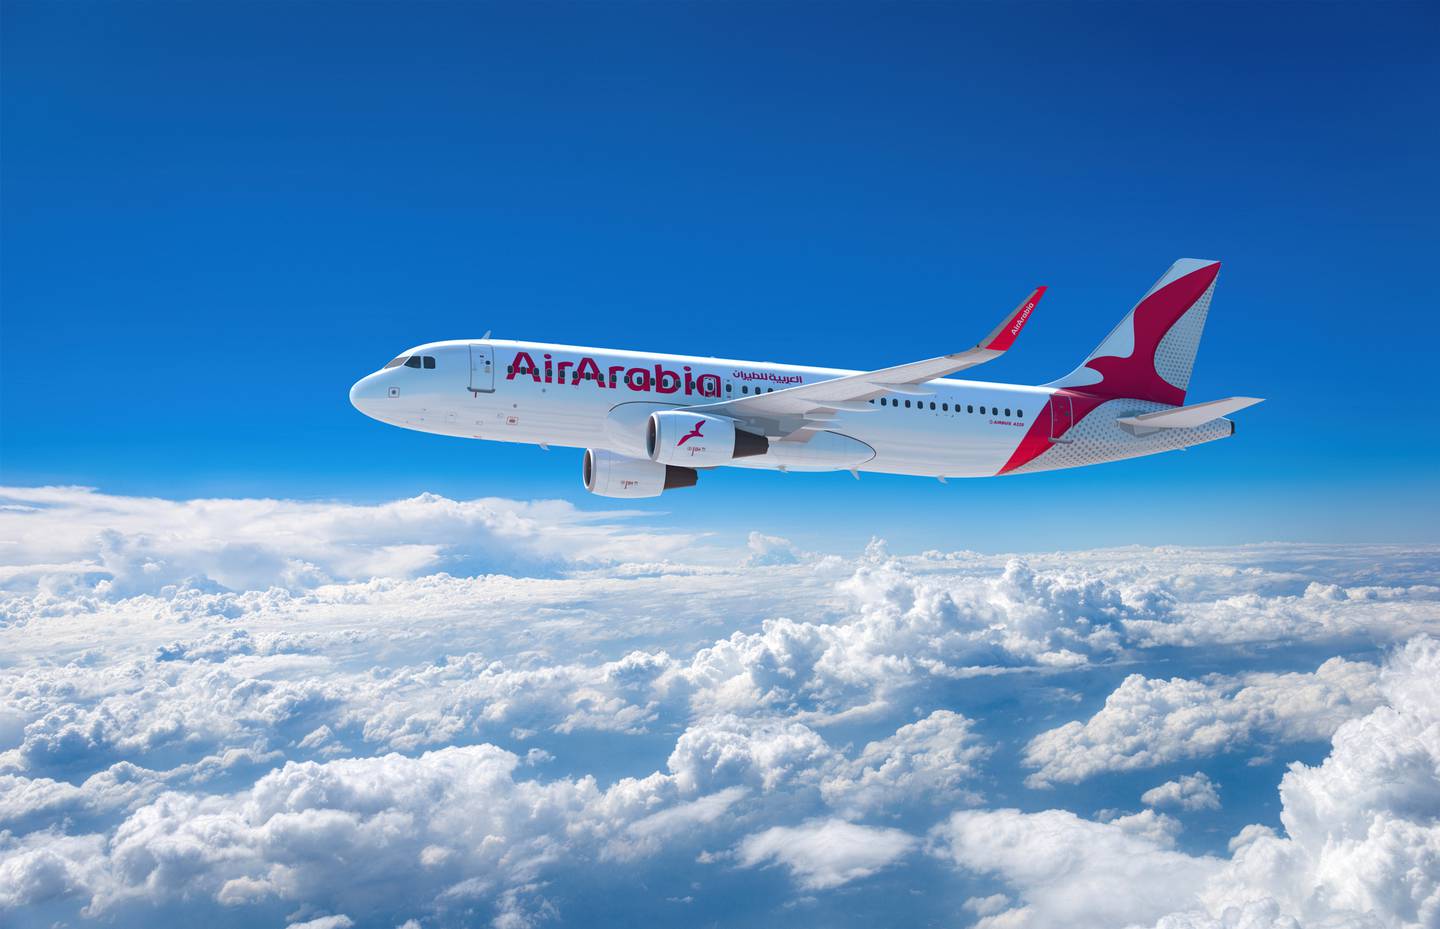 AirArabia ranks 15th in the best low-cost airlines in the world ranking. Photo: AirArabia